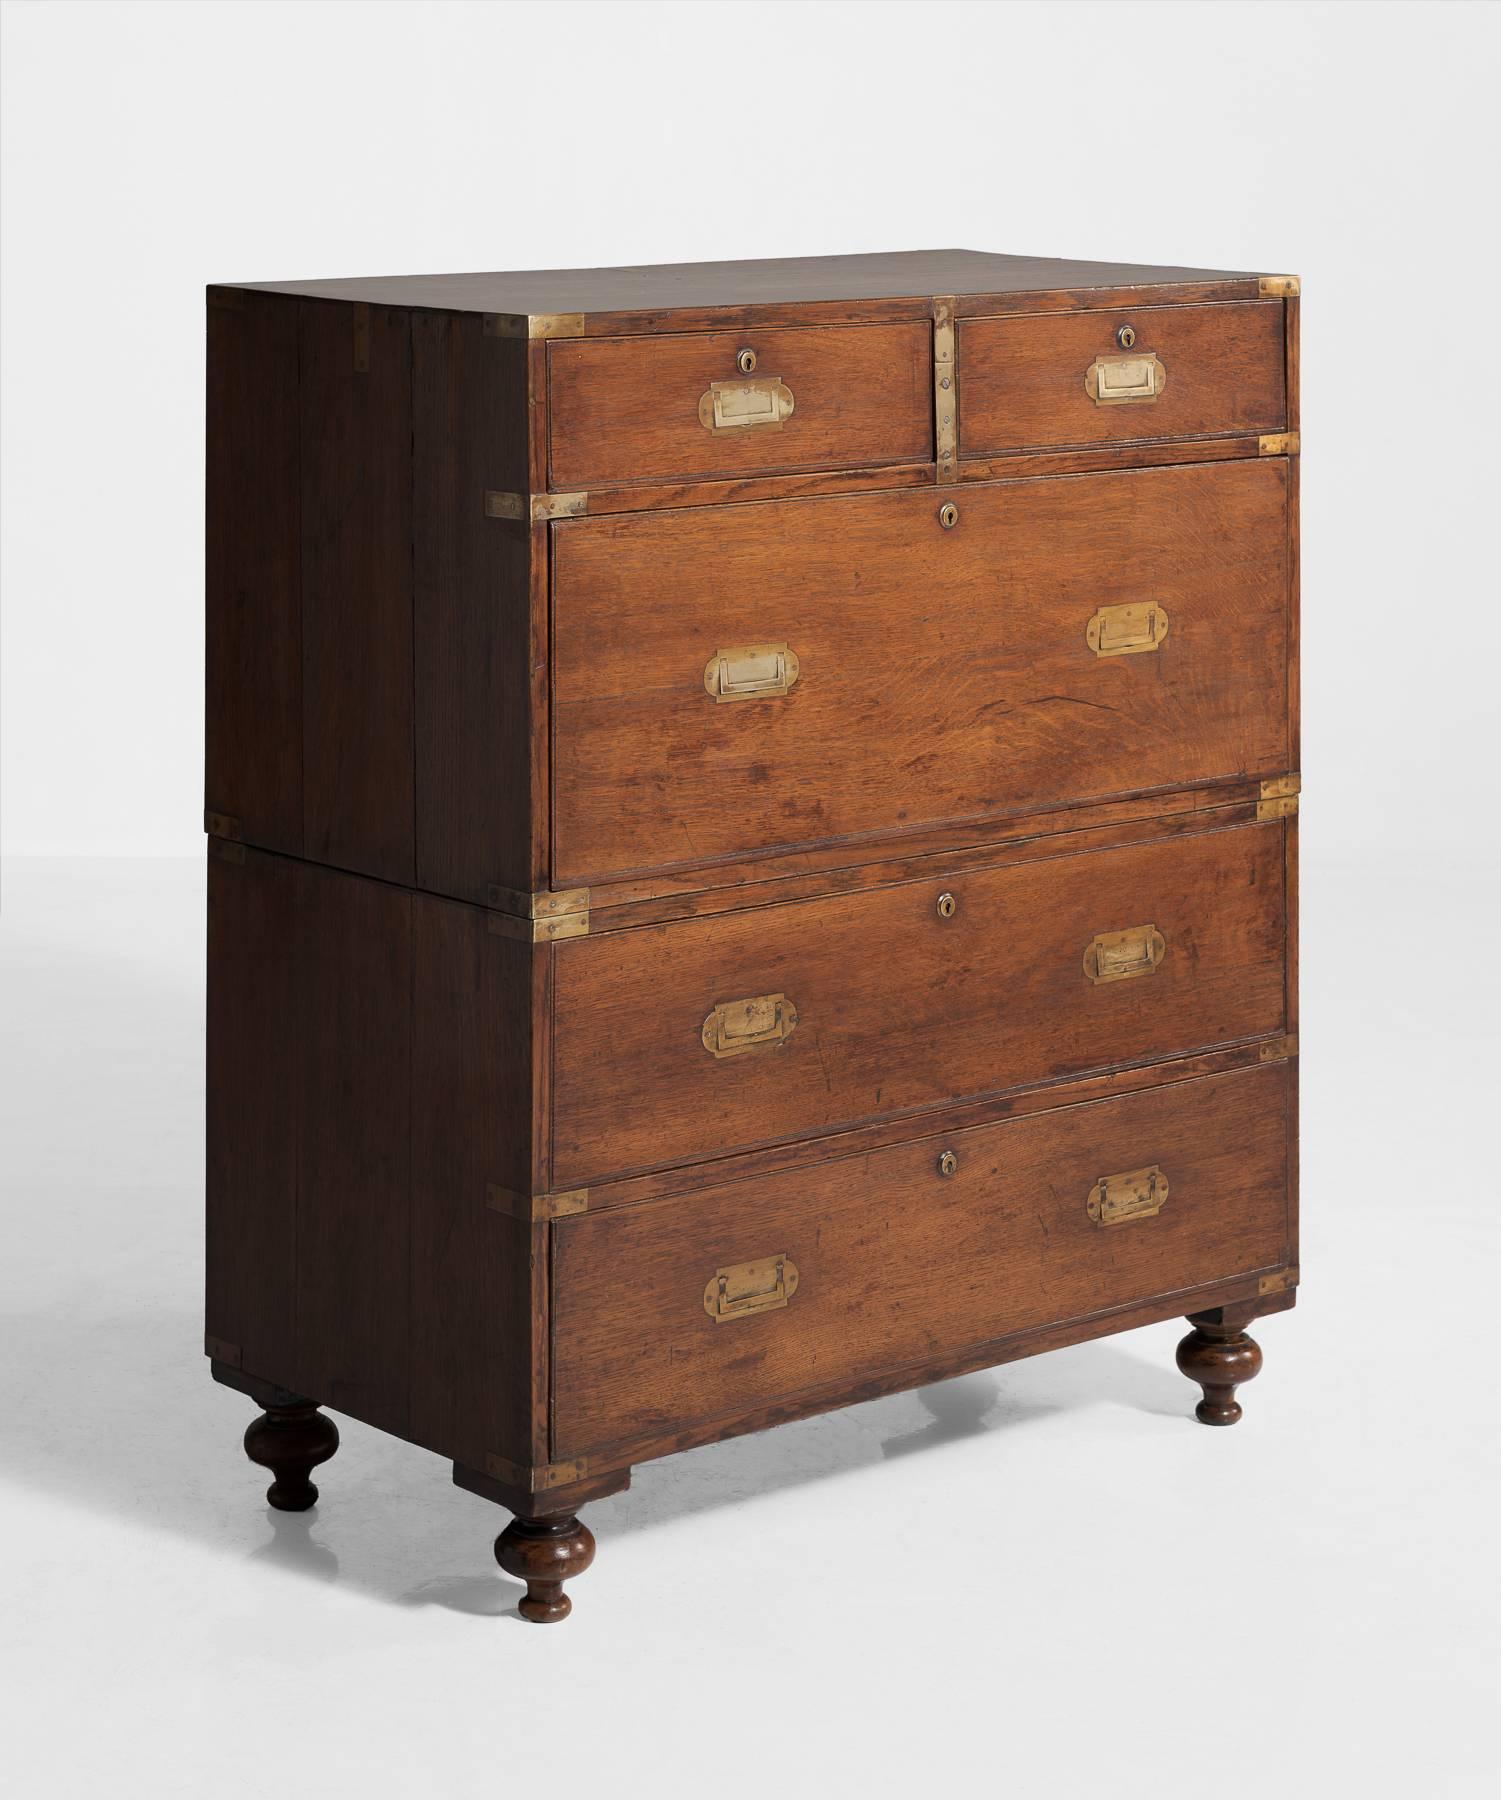 Edwardian Campaign Chest of Drawers, England, circa 1910